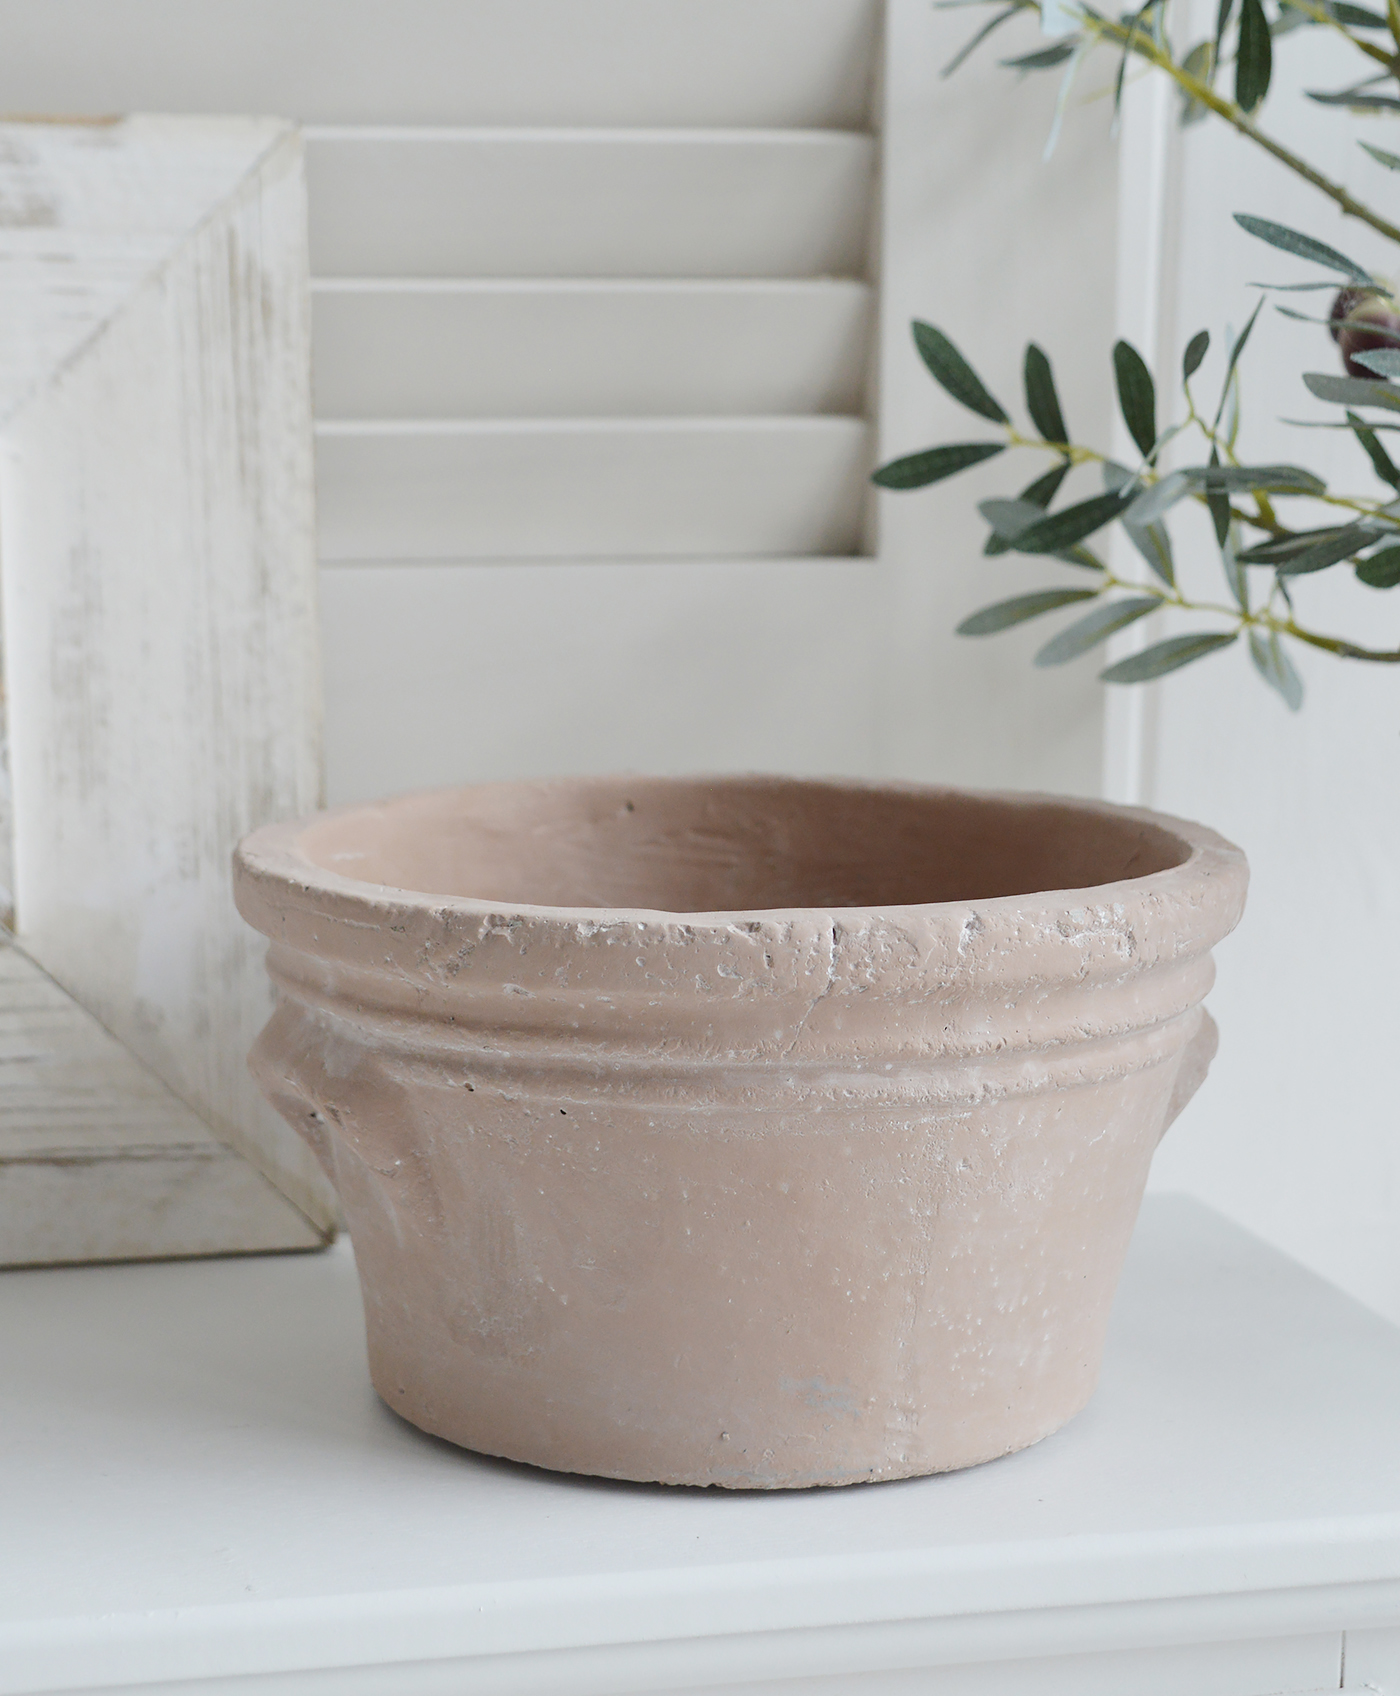 Stoneham Rustic Terracotta Pot - Console table styling for New England and Hamptons Interiors